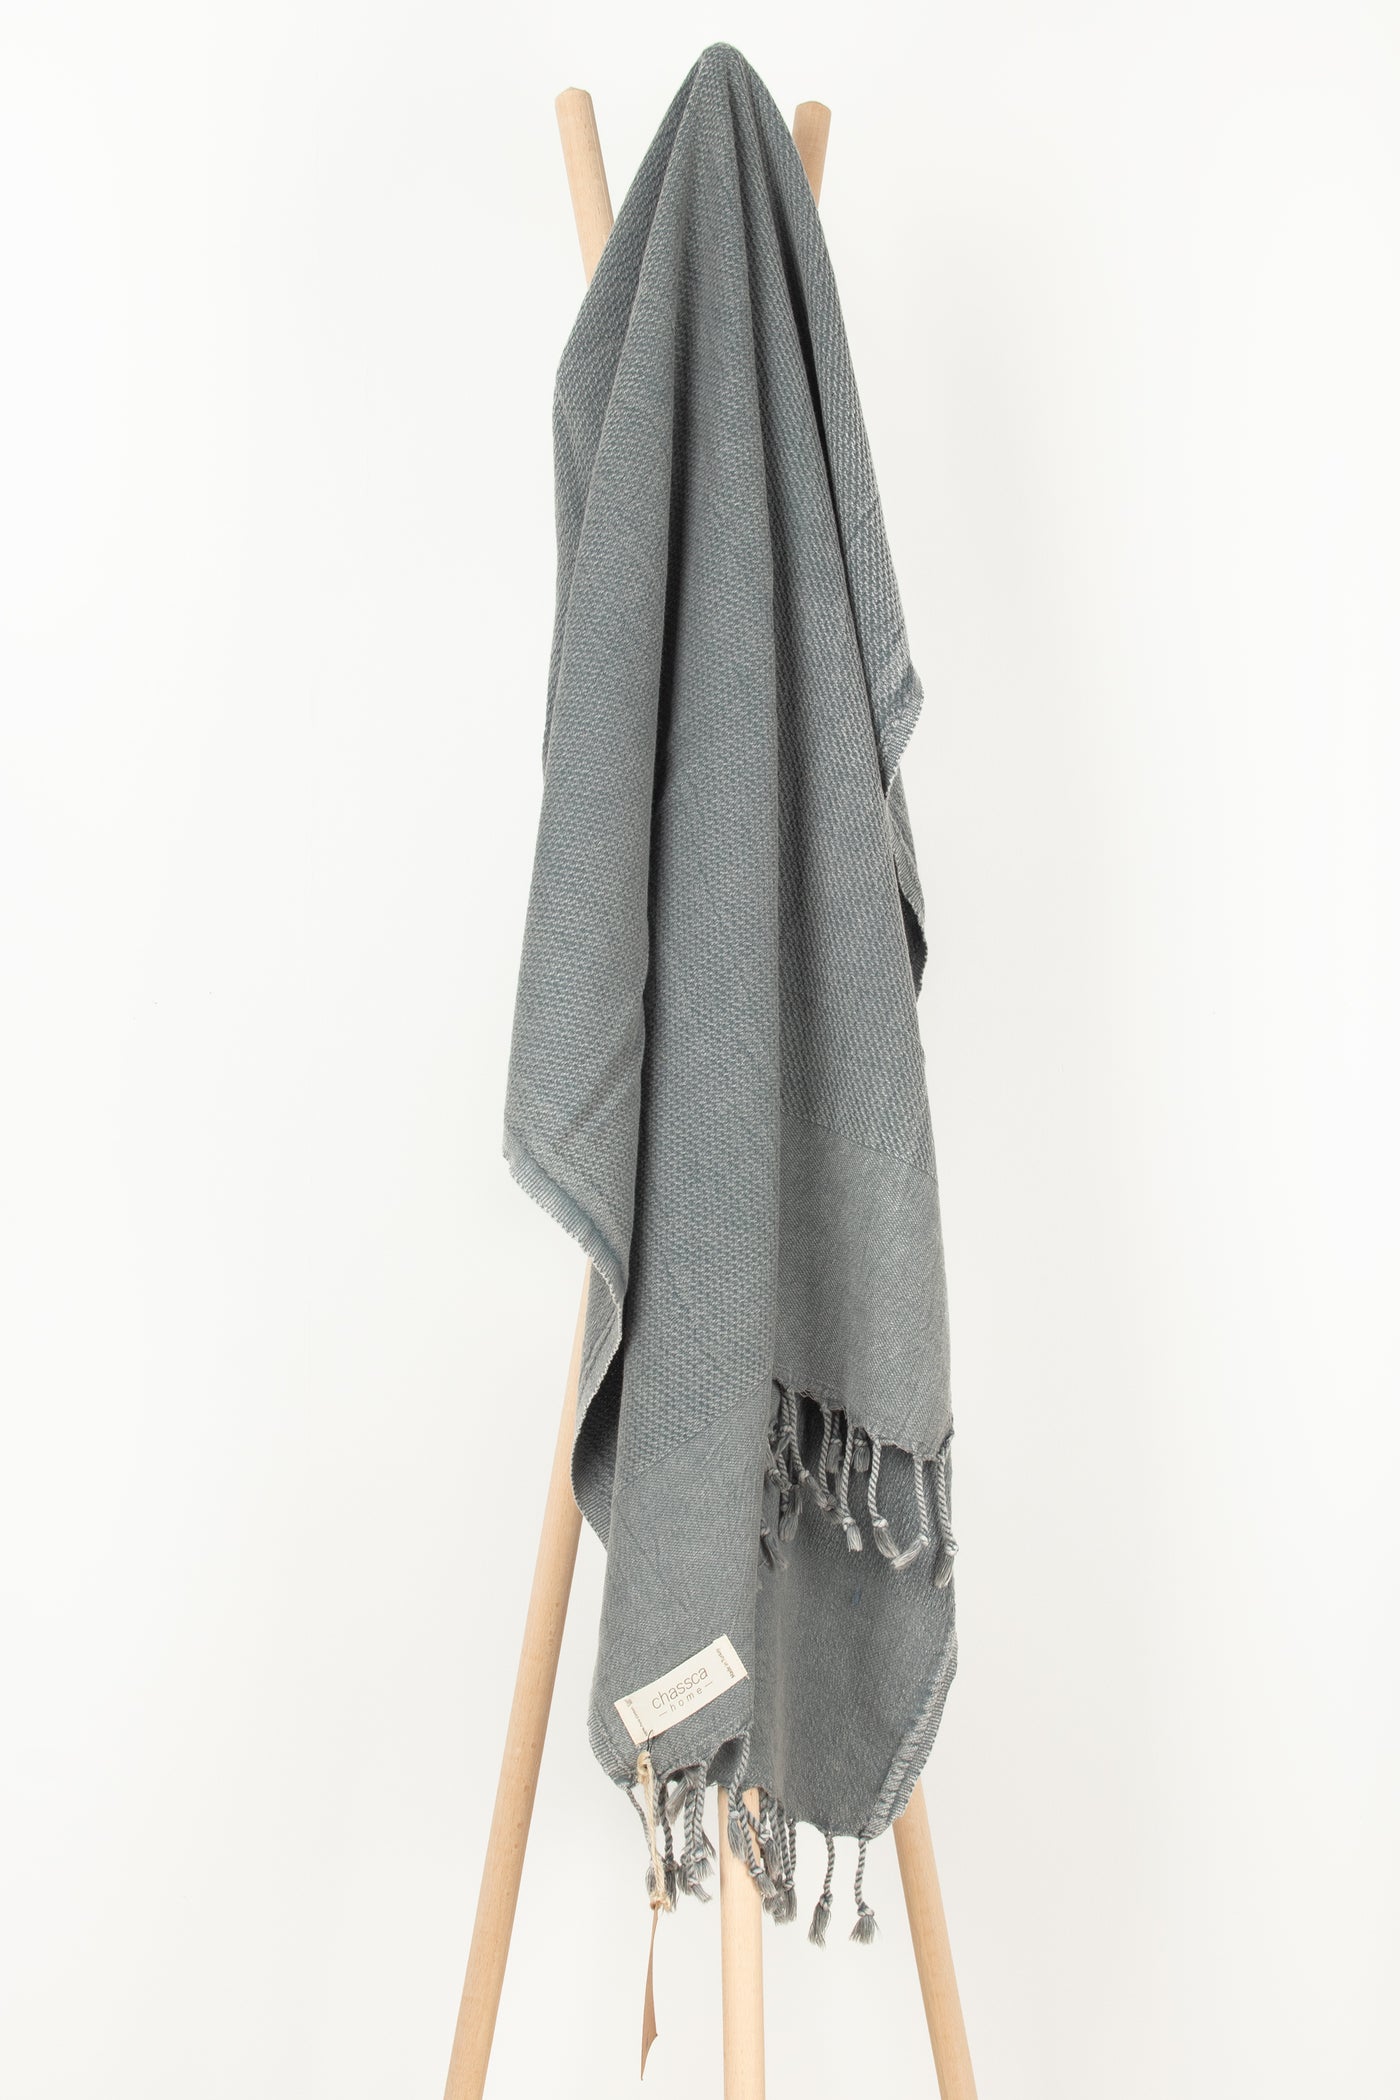 Chassca Home Special Edition Stonewashed Turkish Towel